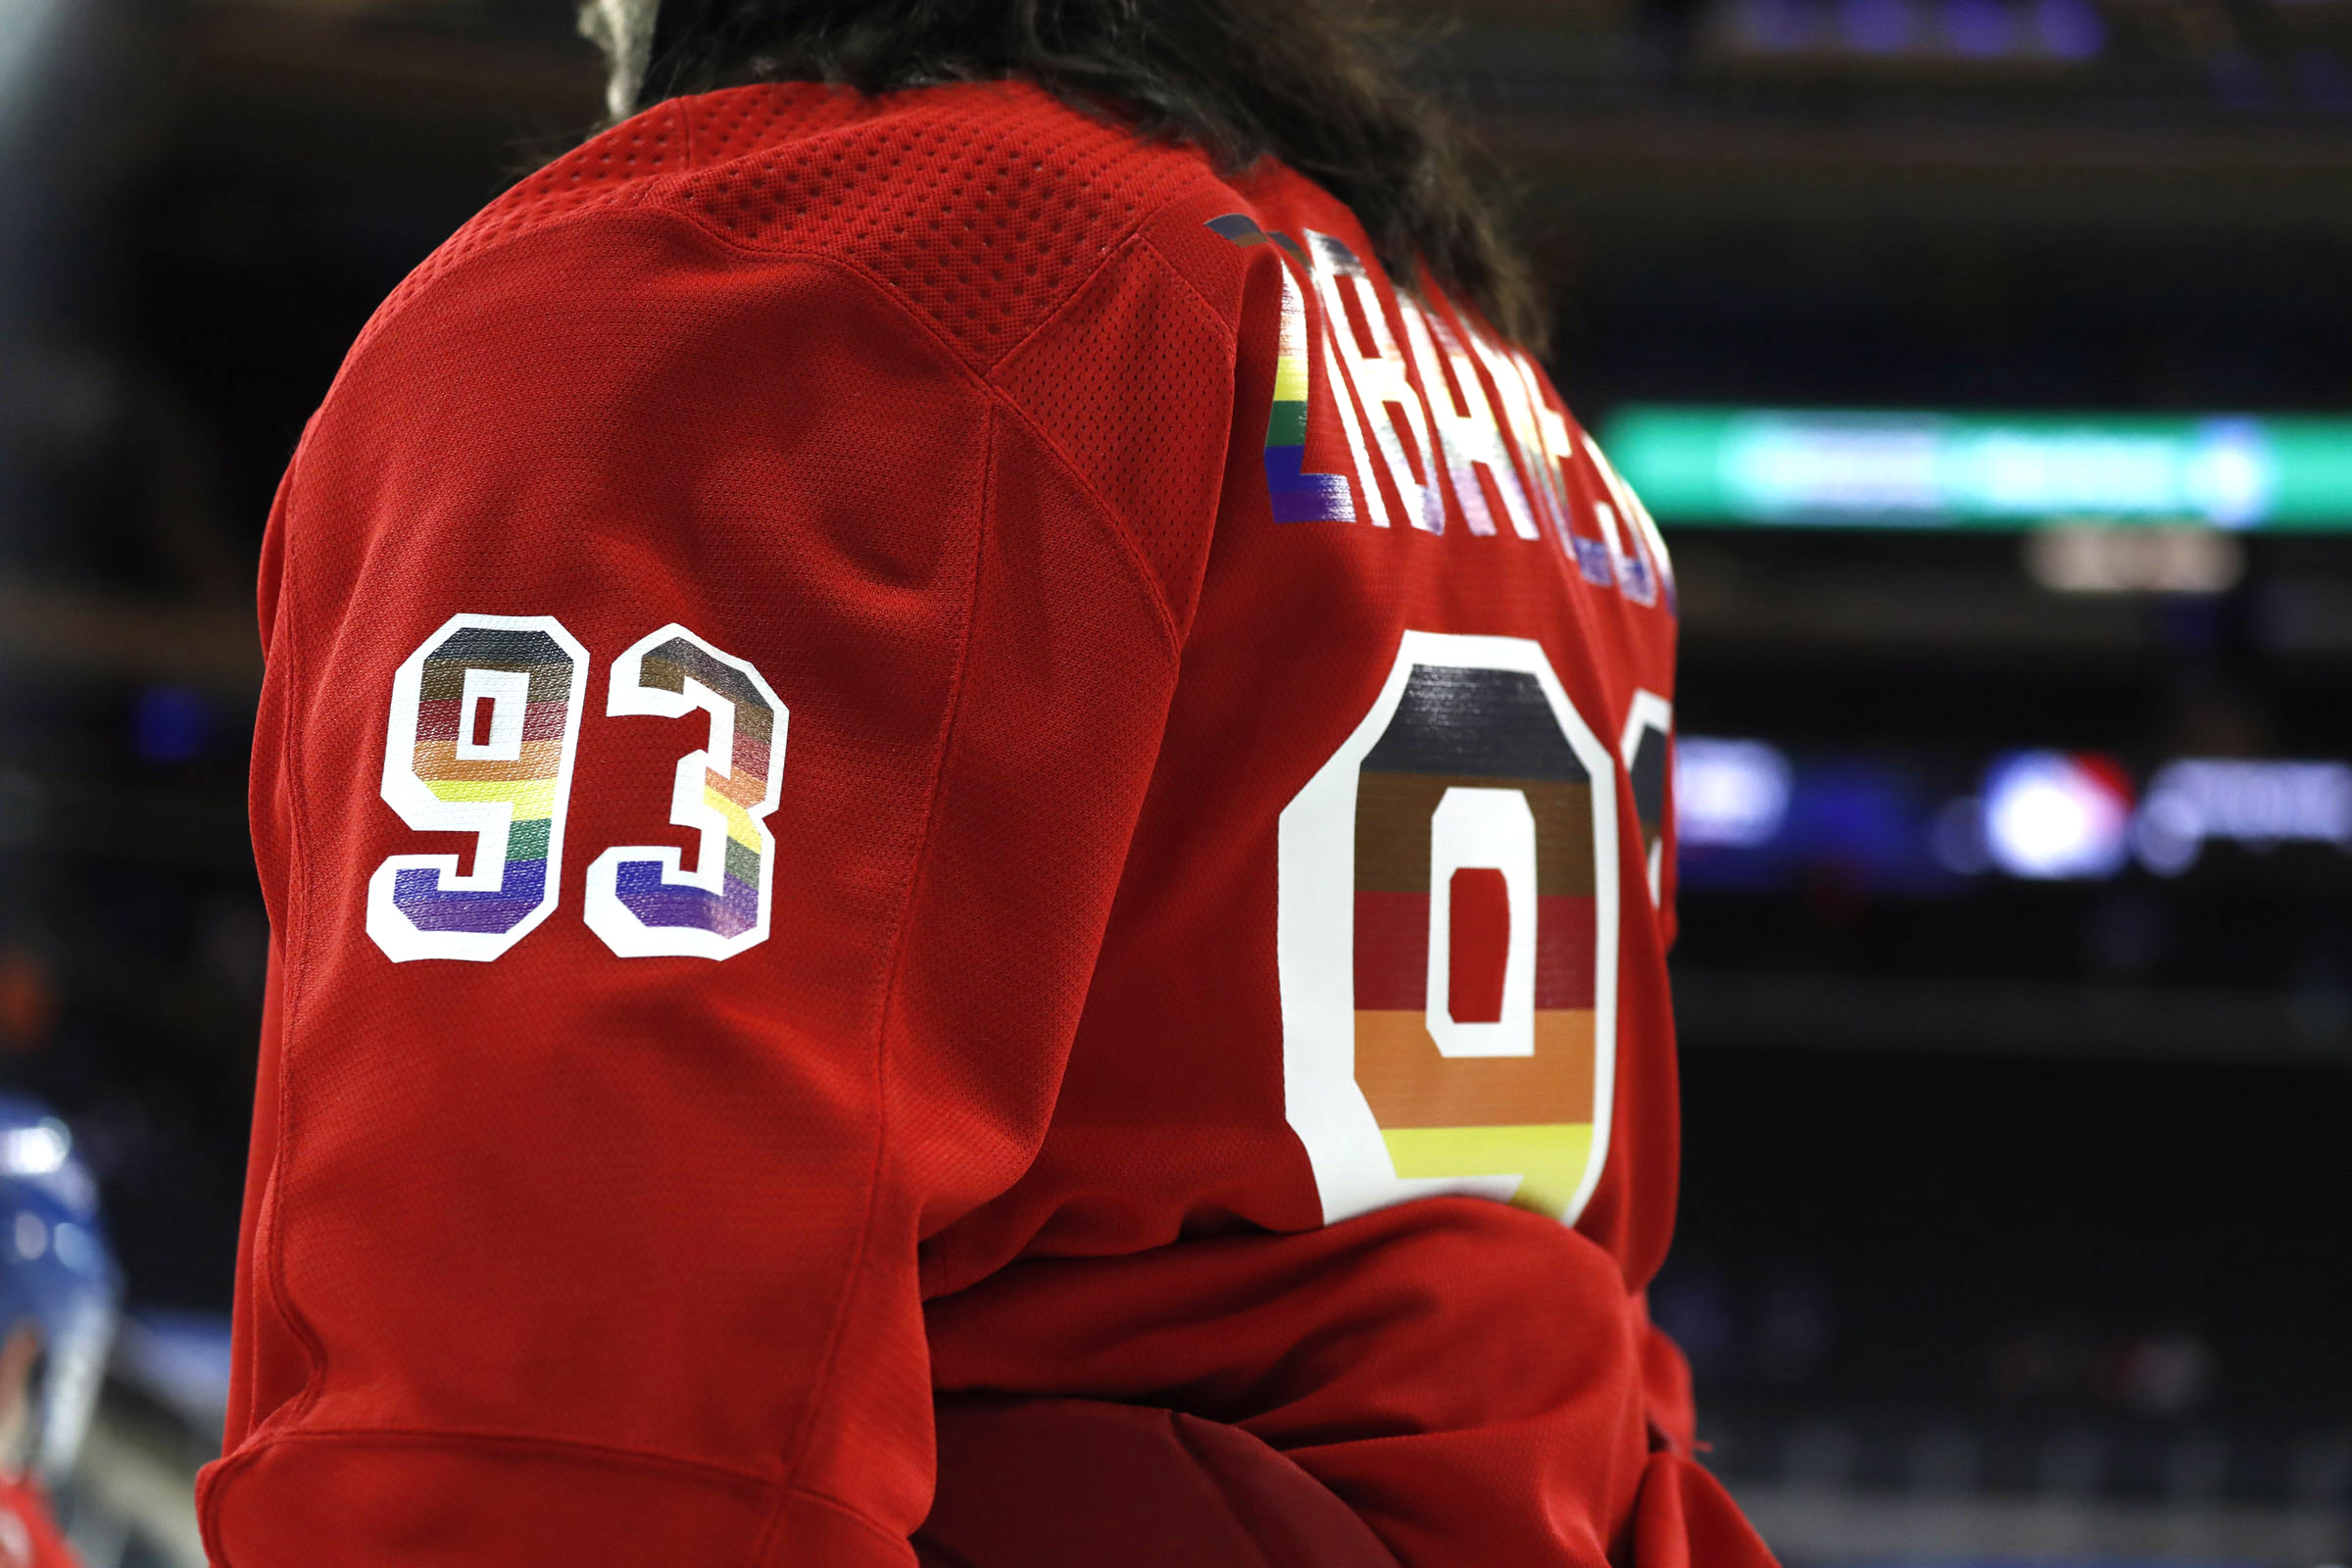 New York Rangers set back NHL LGBT community with Pride jersey refusal -  Outsports